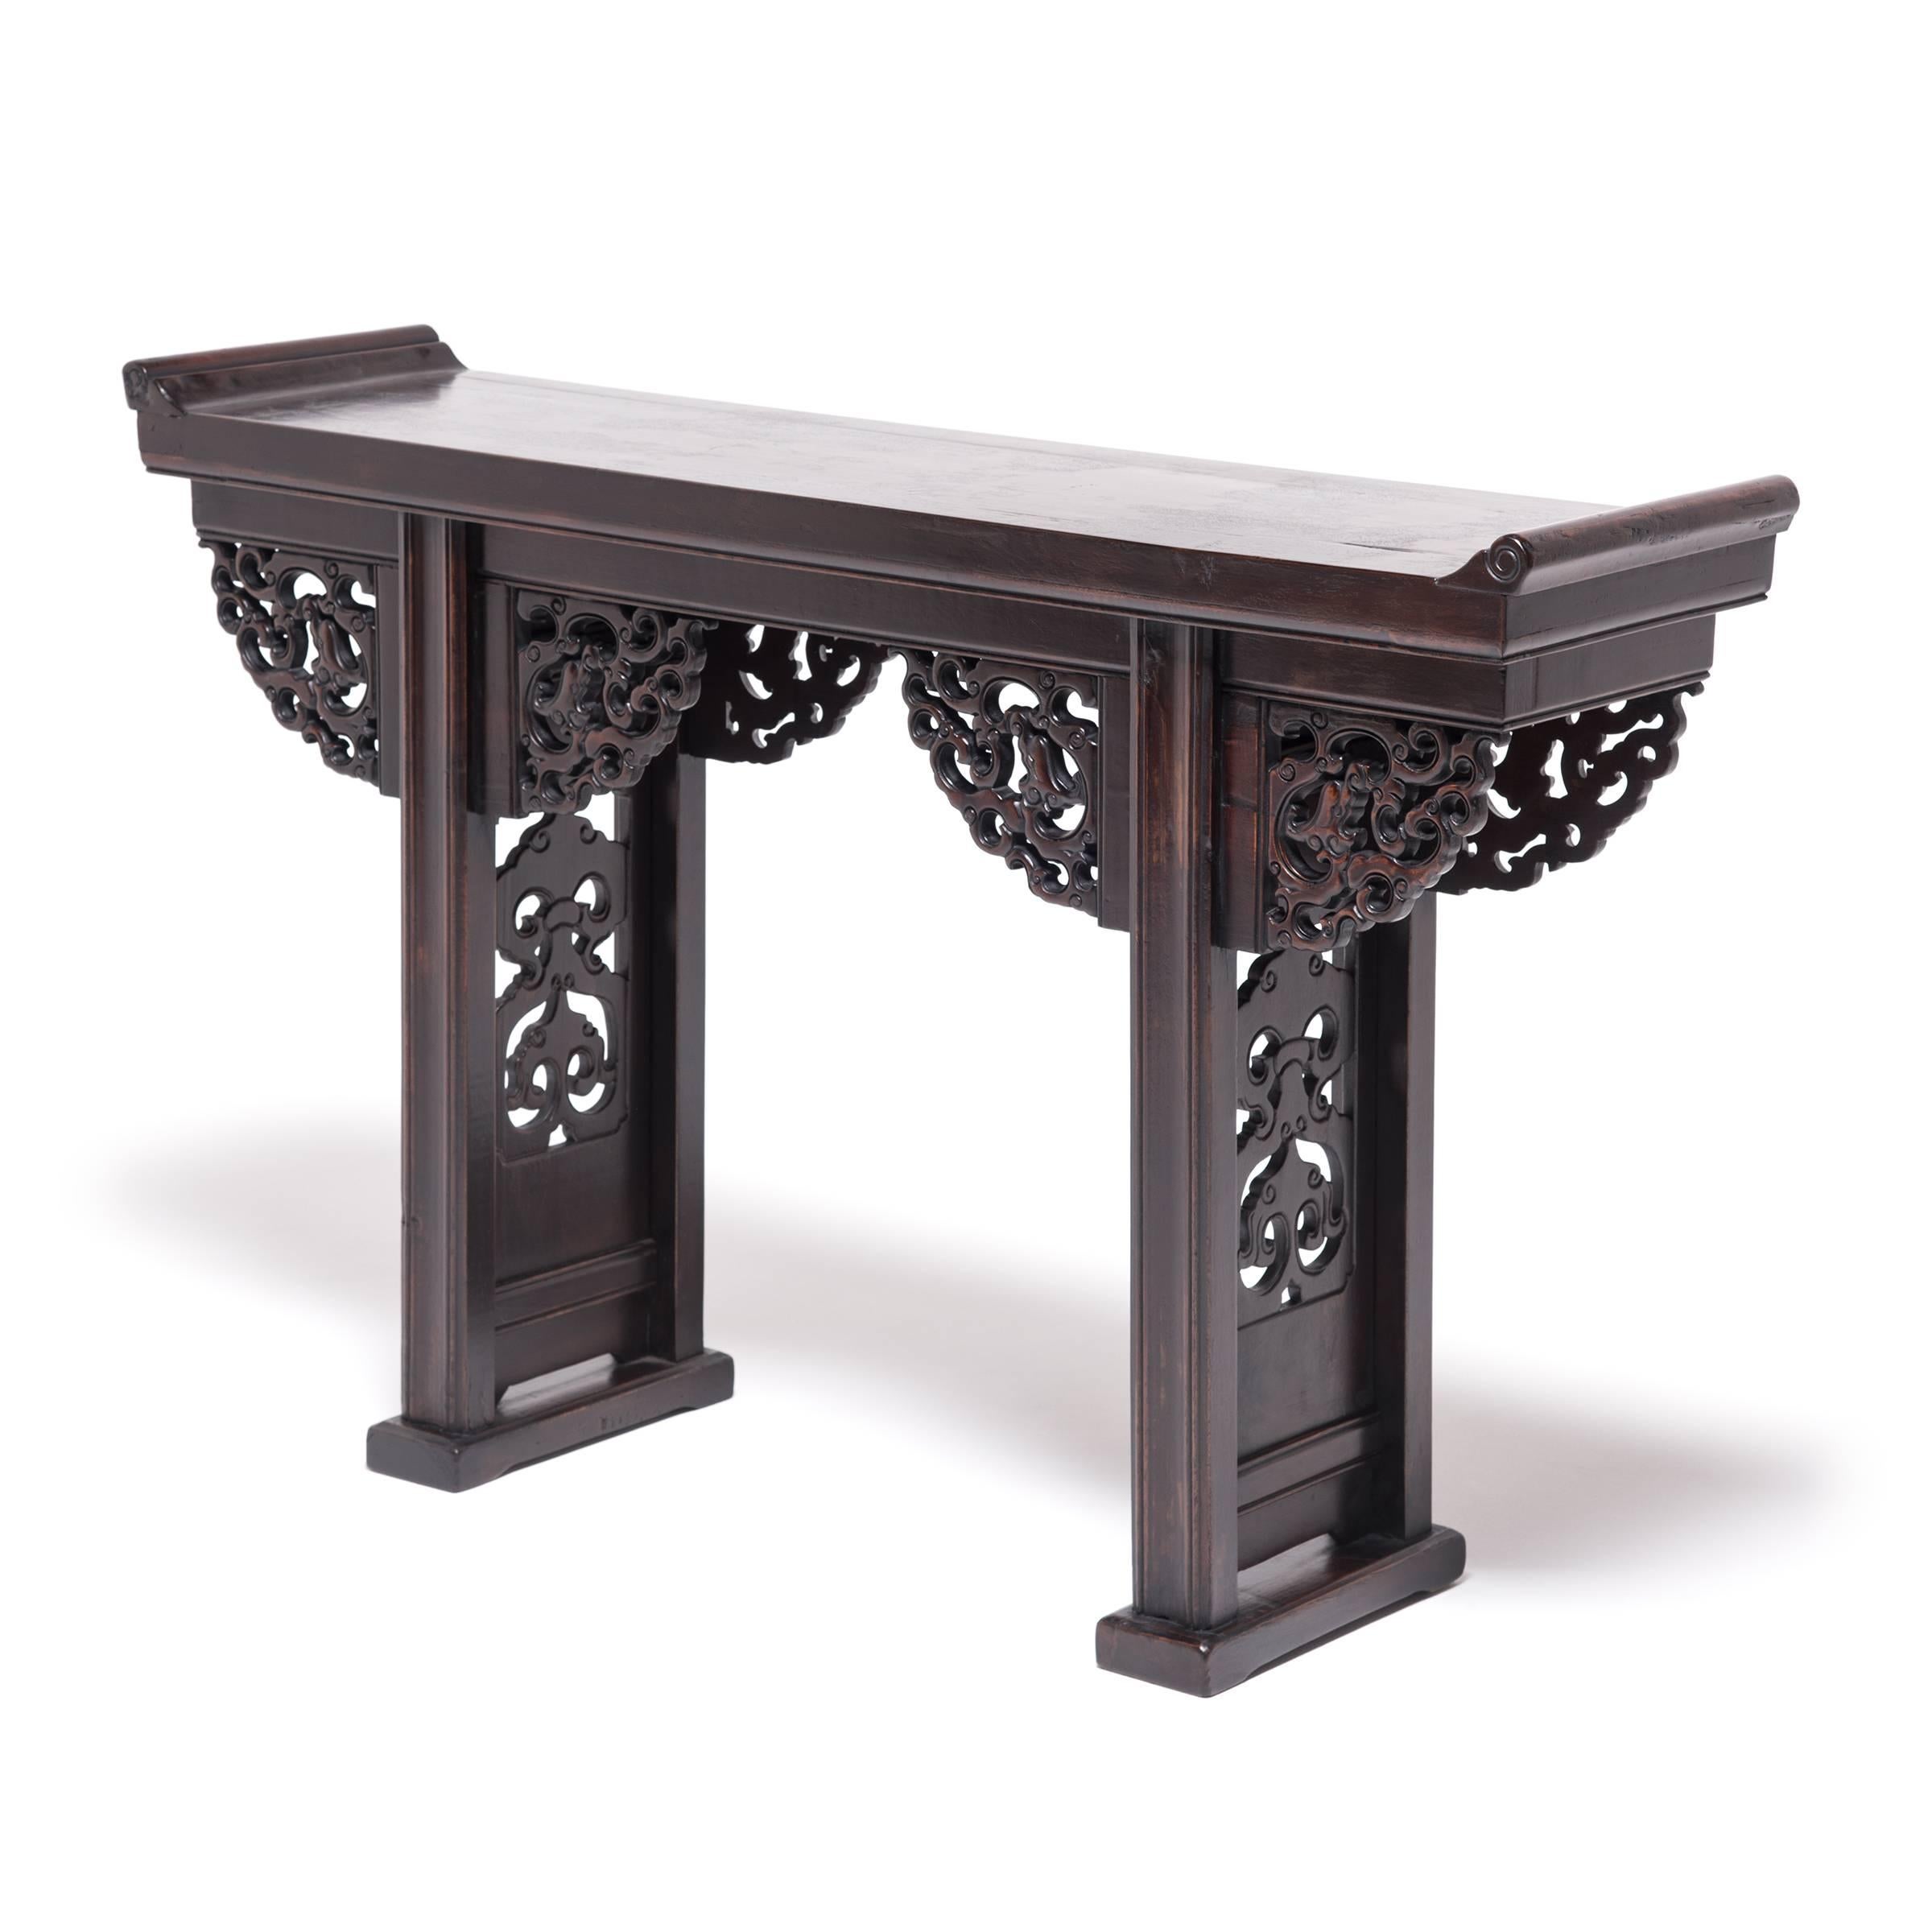 Six elaborately carved dragons in still this dramatic altar table with potent and auspicious power. Providing delicate counterpoint to the table’s strong Silhouette - defined by everted ends and trestle legs - the intricate carvings bring exuberant